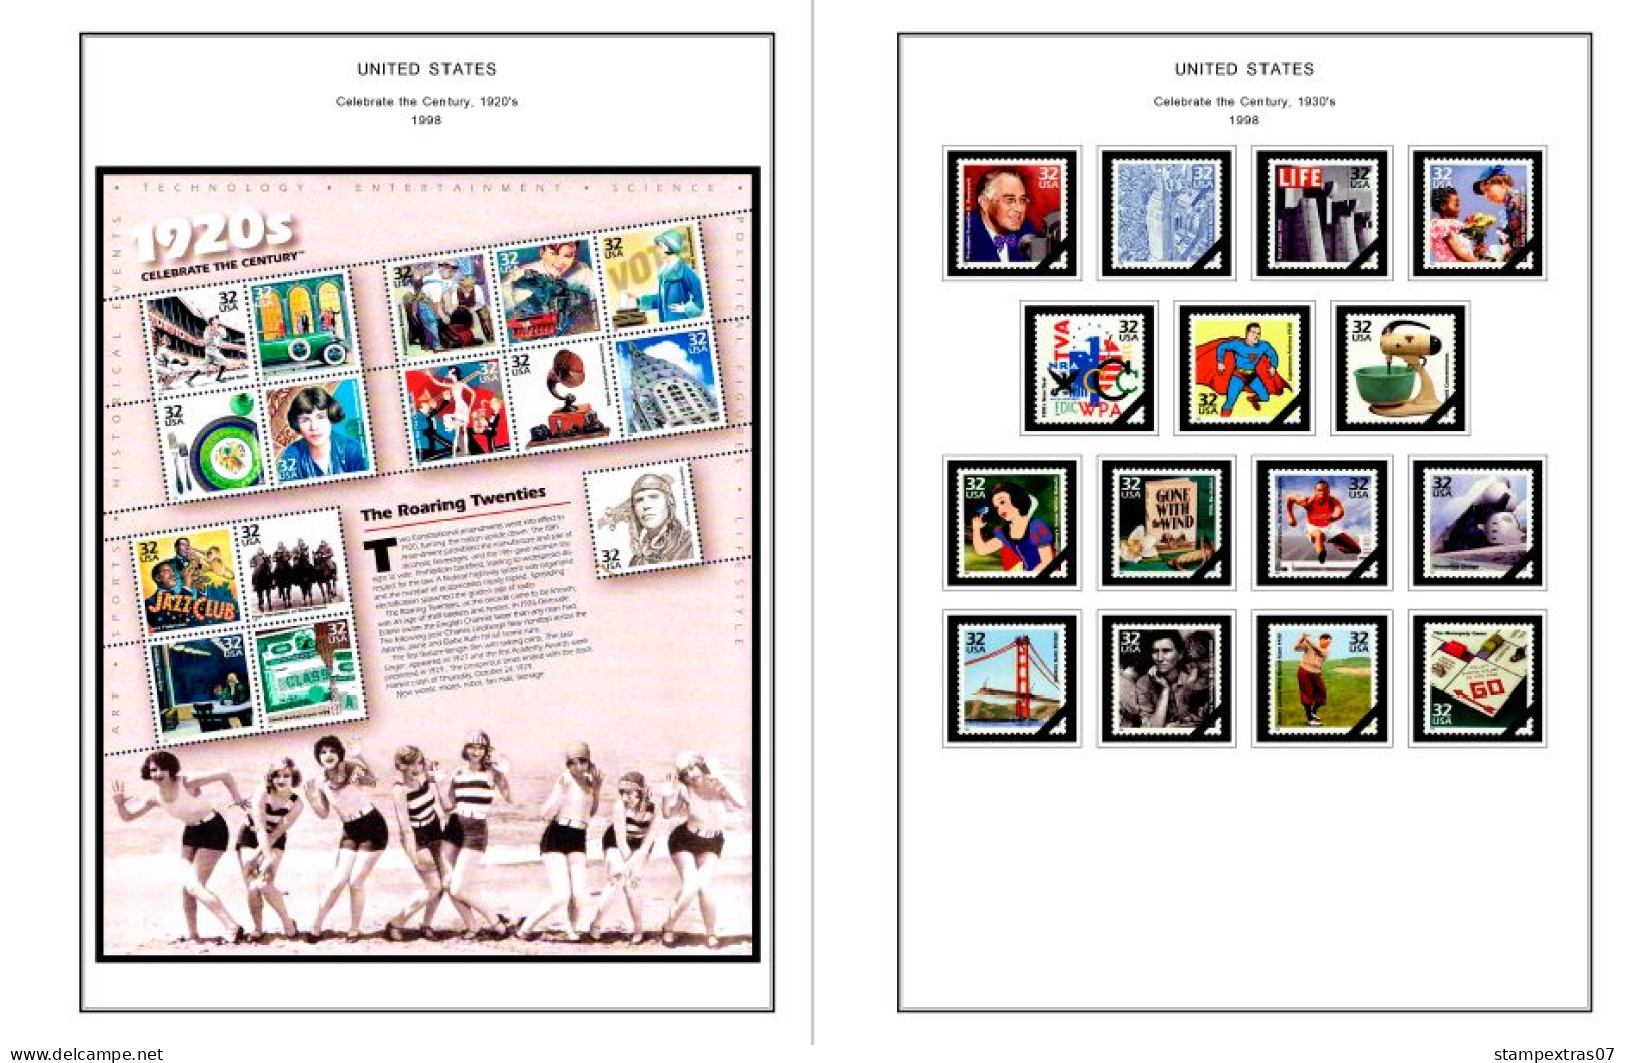 COLOR PRINTED USA 1991-1999 STAMP ALBUM PAGES (143 illustrated pages) >> FEUILLES ALBUM